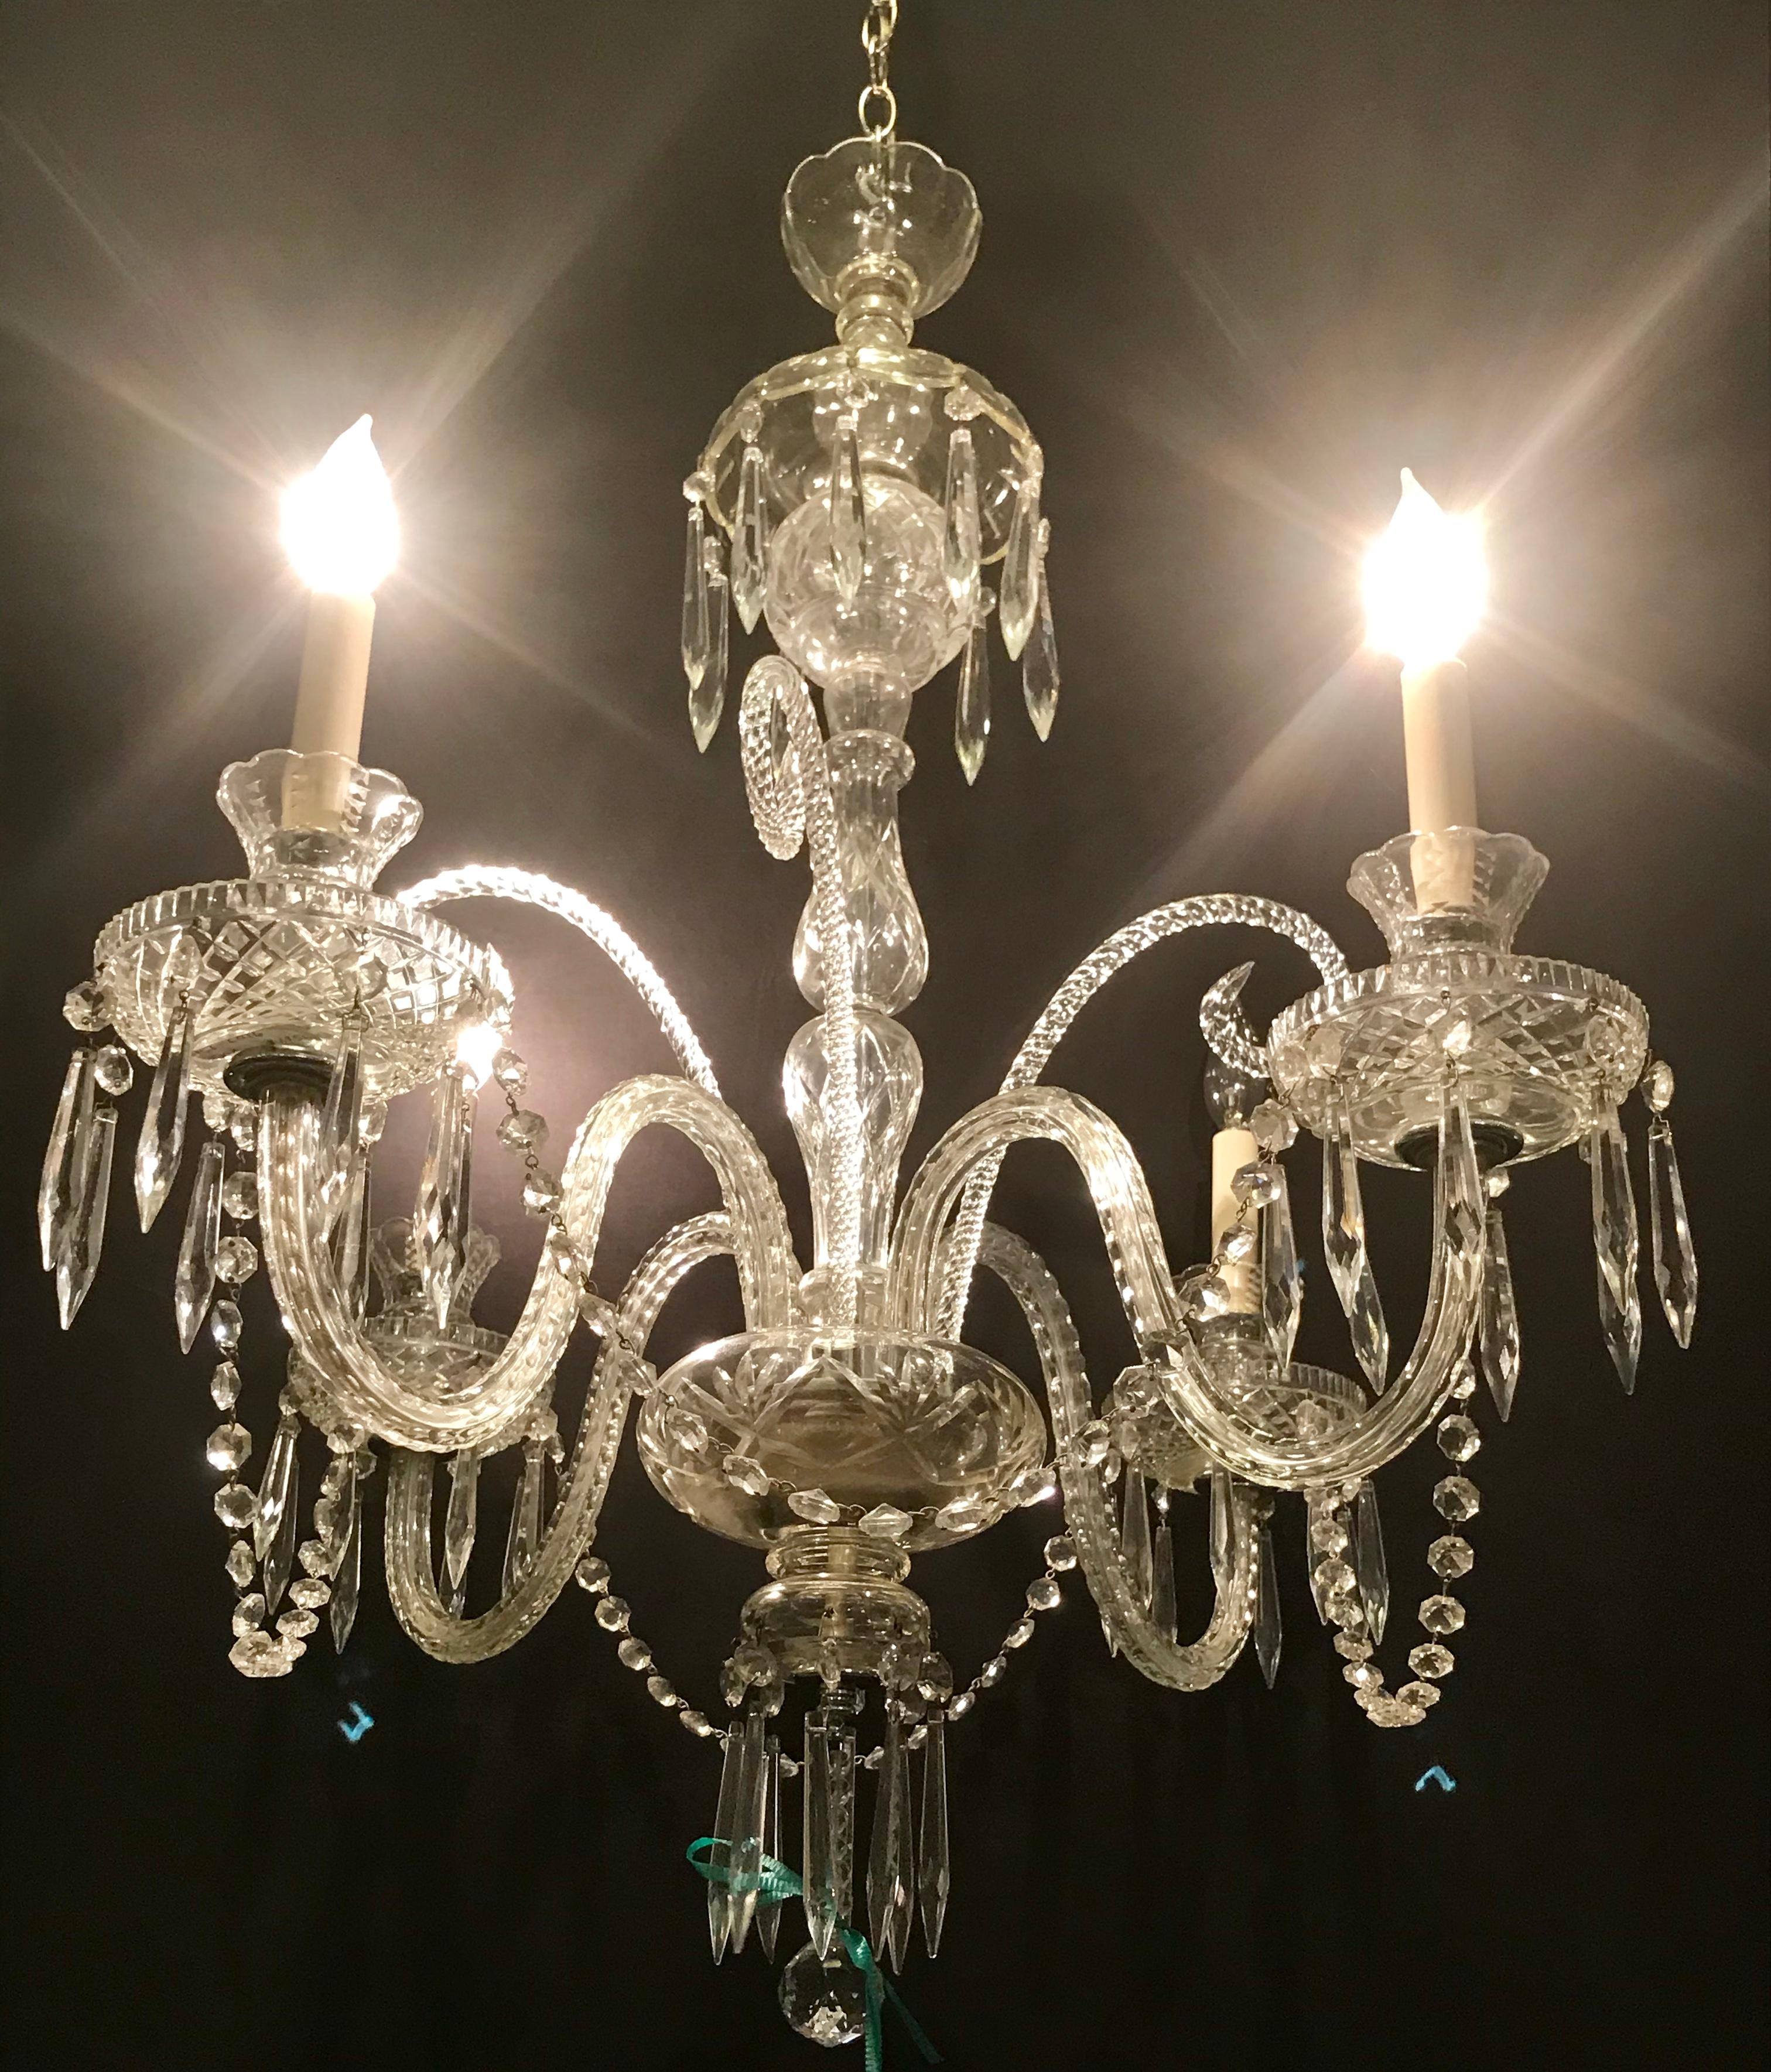 A Hollywood Regency Waterford style crystal 5-light chandelier. Sleek and simplistic is this finely cut crystal light fixture which has been recently rewired and can hang on a chain or mounted to the ceiling.